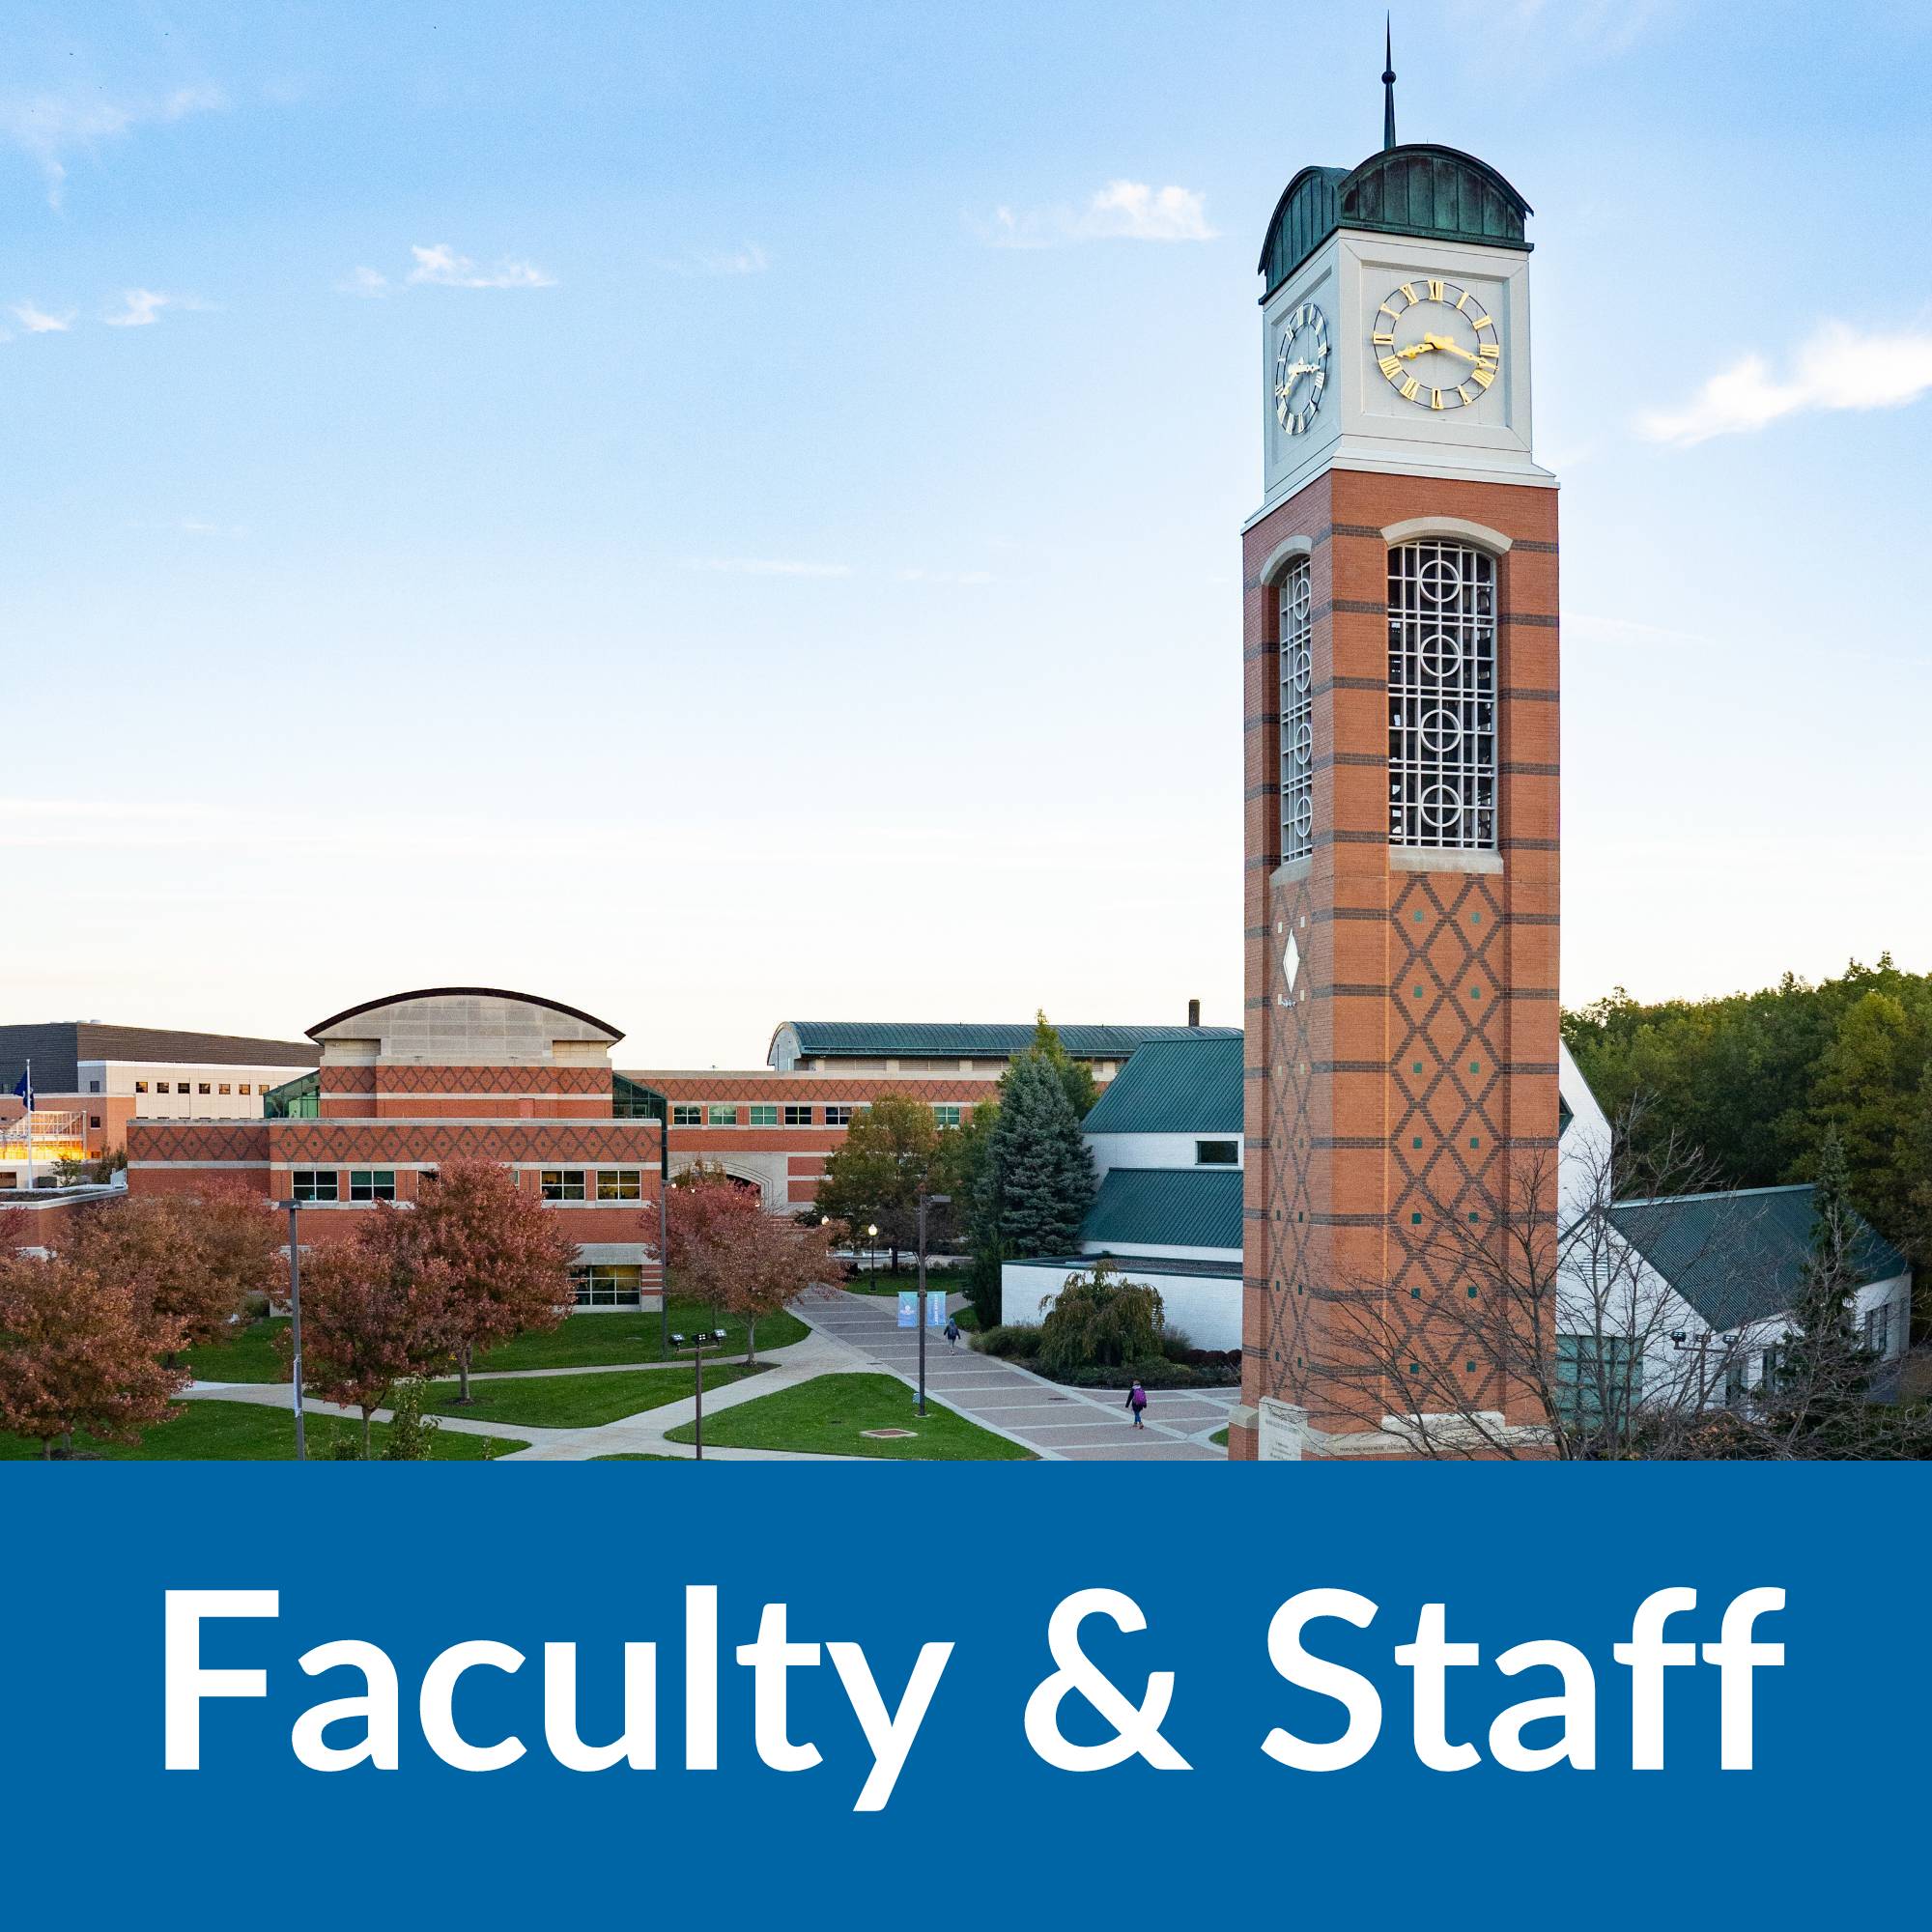 Services for Faculty & Staff